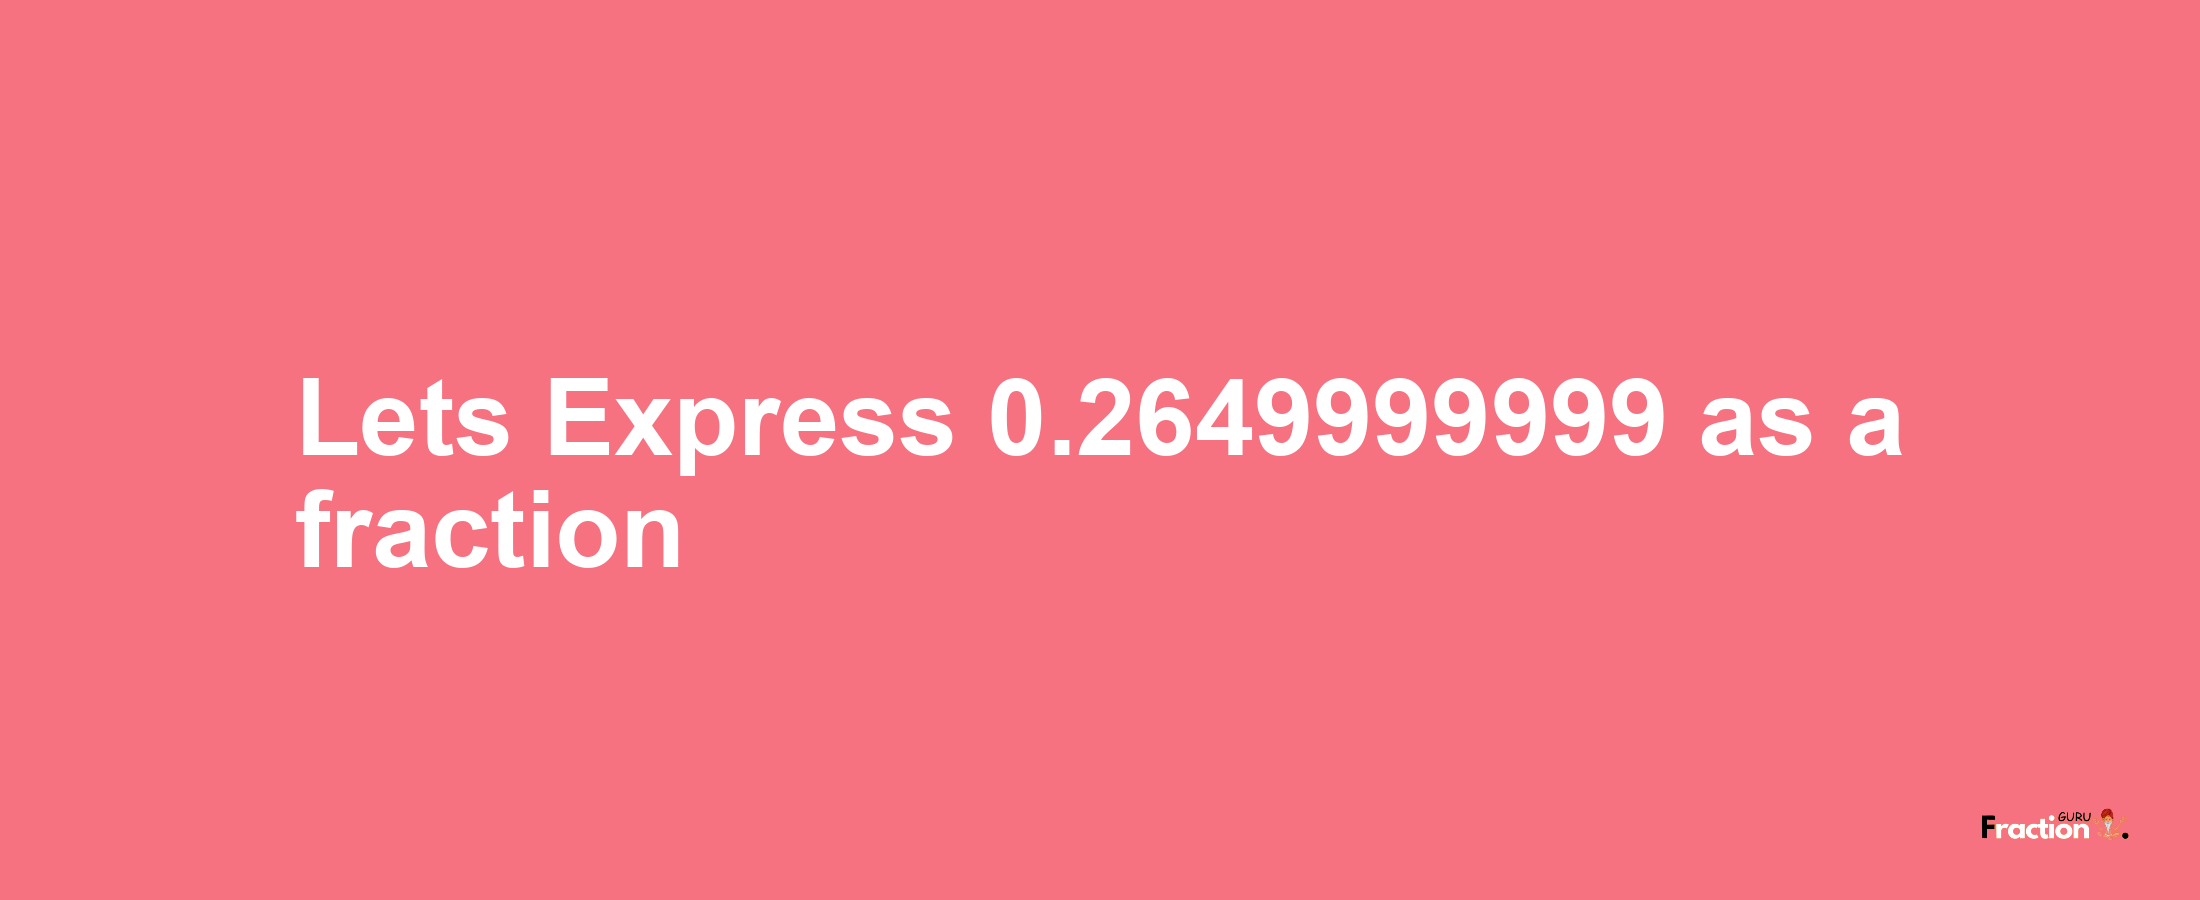 Lets Express 0.2649999999 as afraction